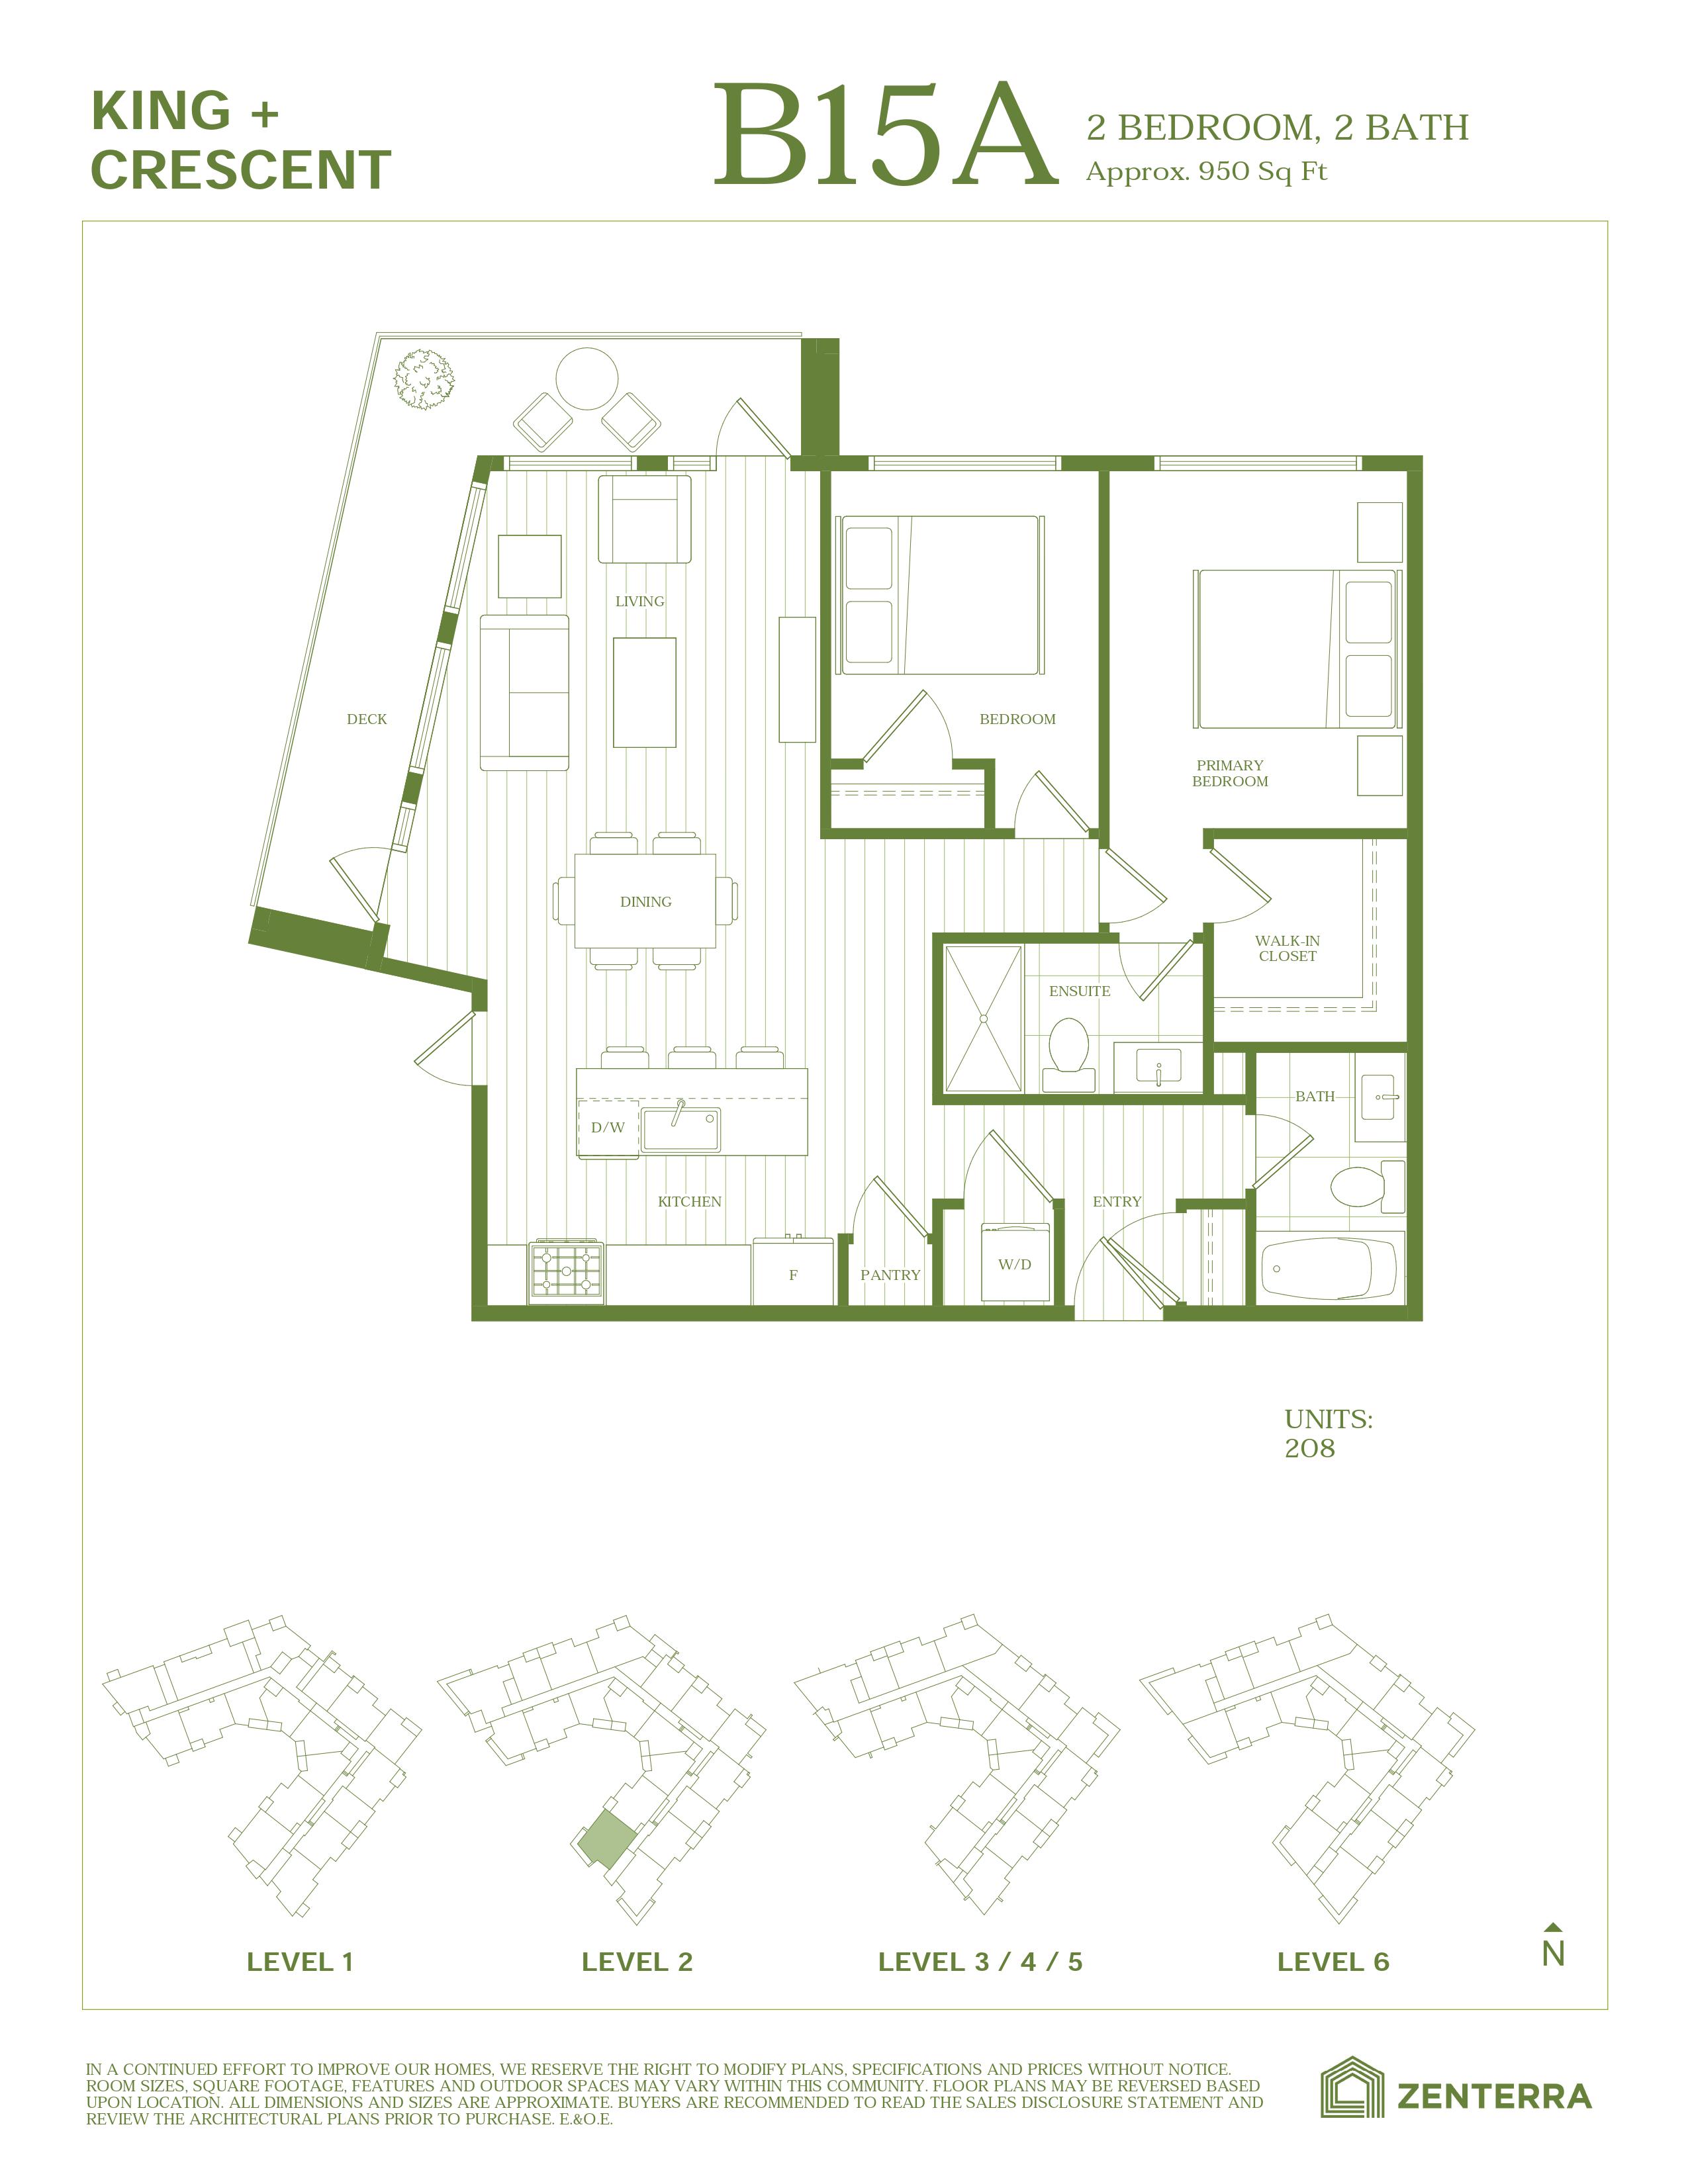 B15A Floor Plan of King + Crescent Condos with undefined beds